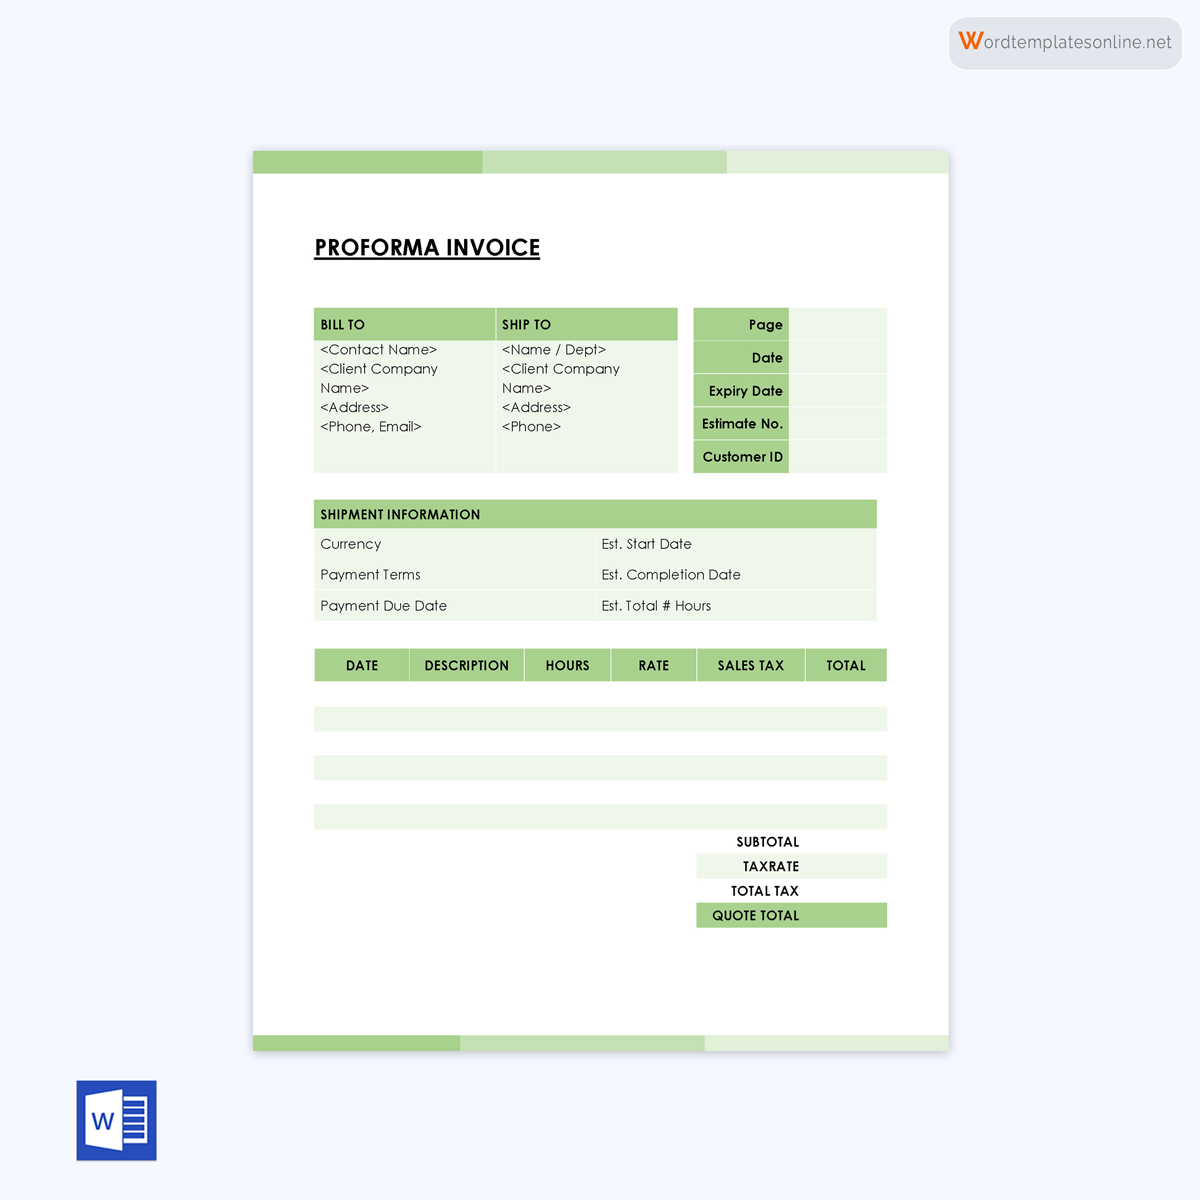 Free Proforma Invoice Format - Word Template